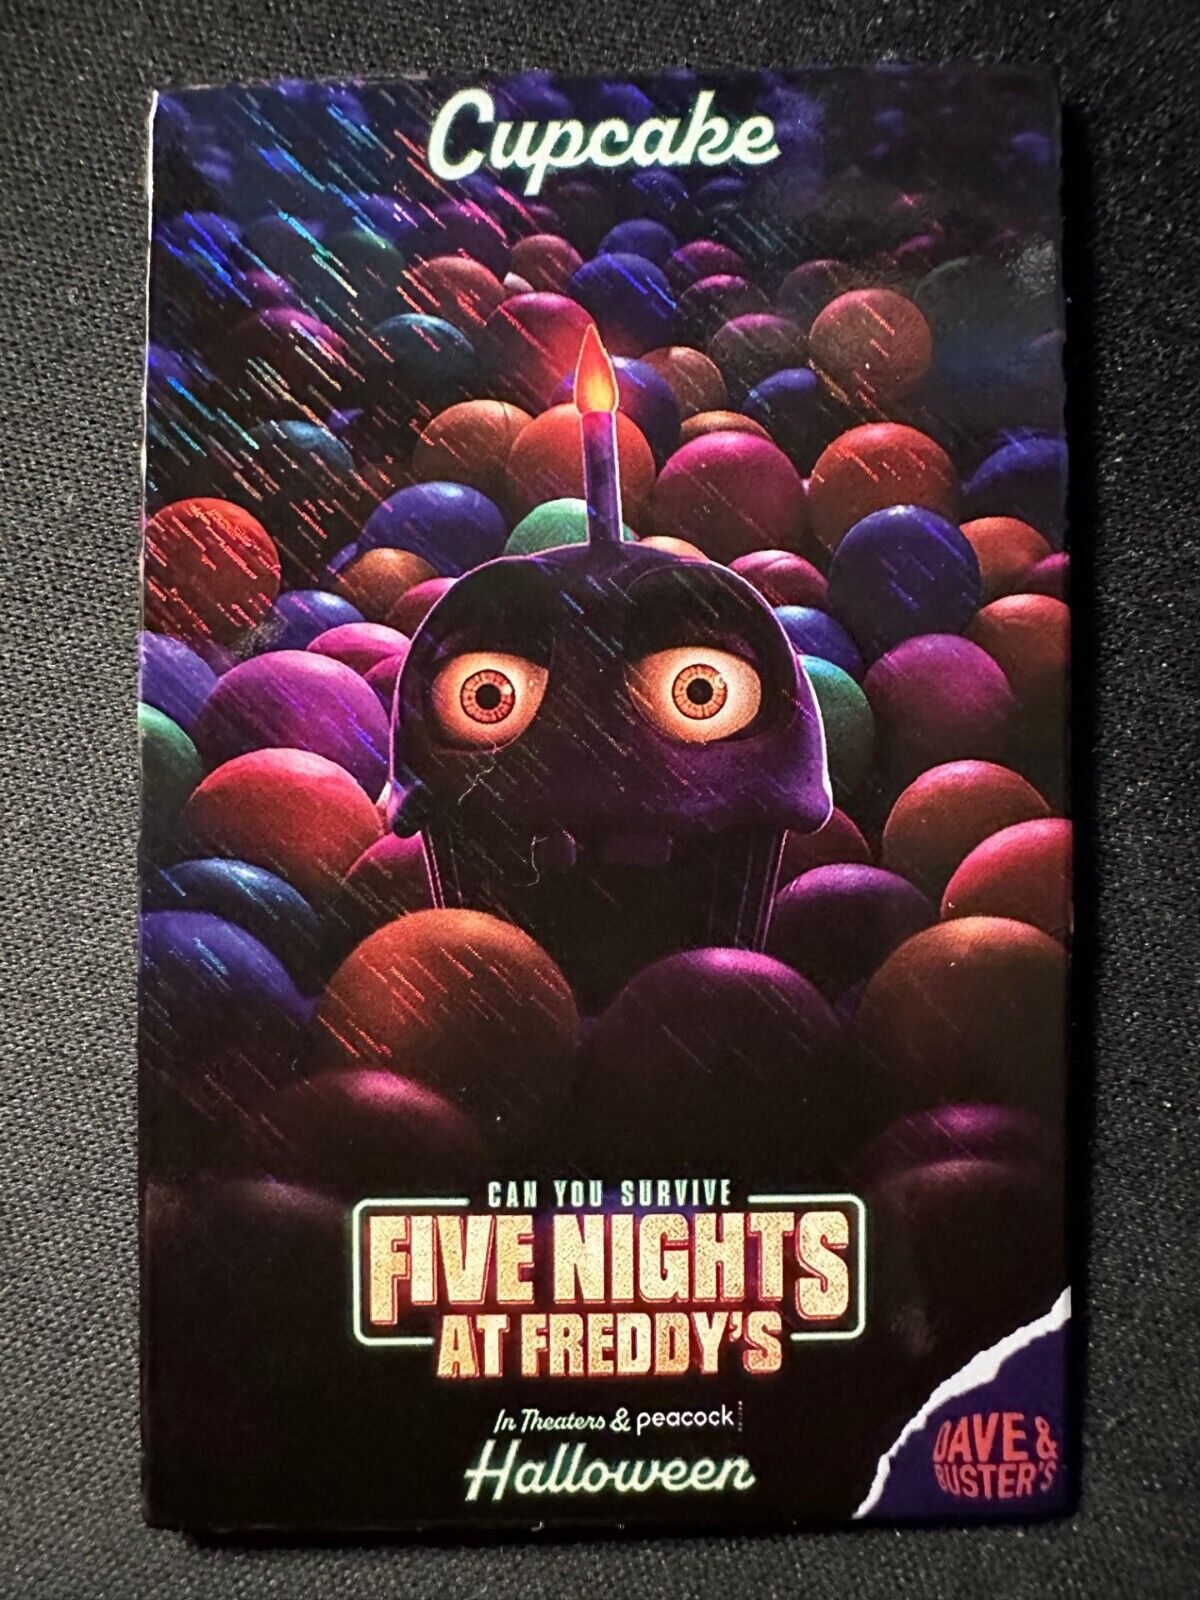 Dave & Busters - Five Nights at Freddy's - Cupcake (Foil, New)